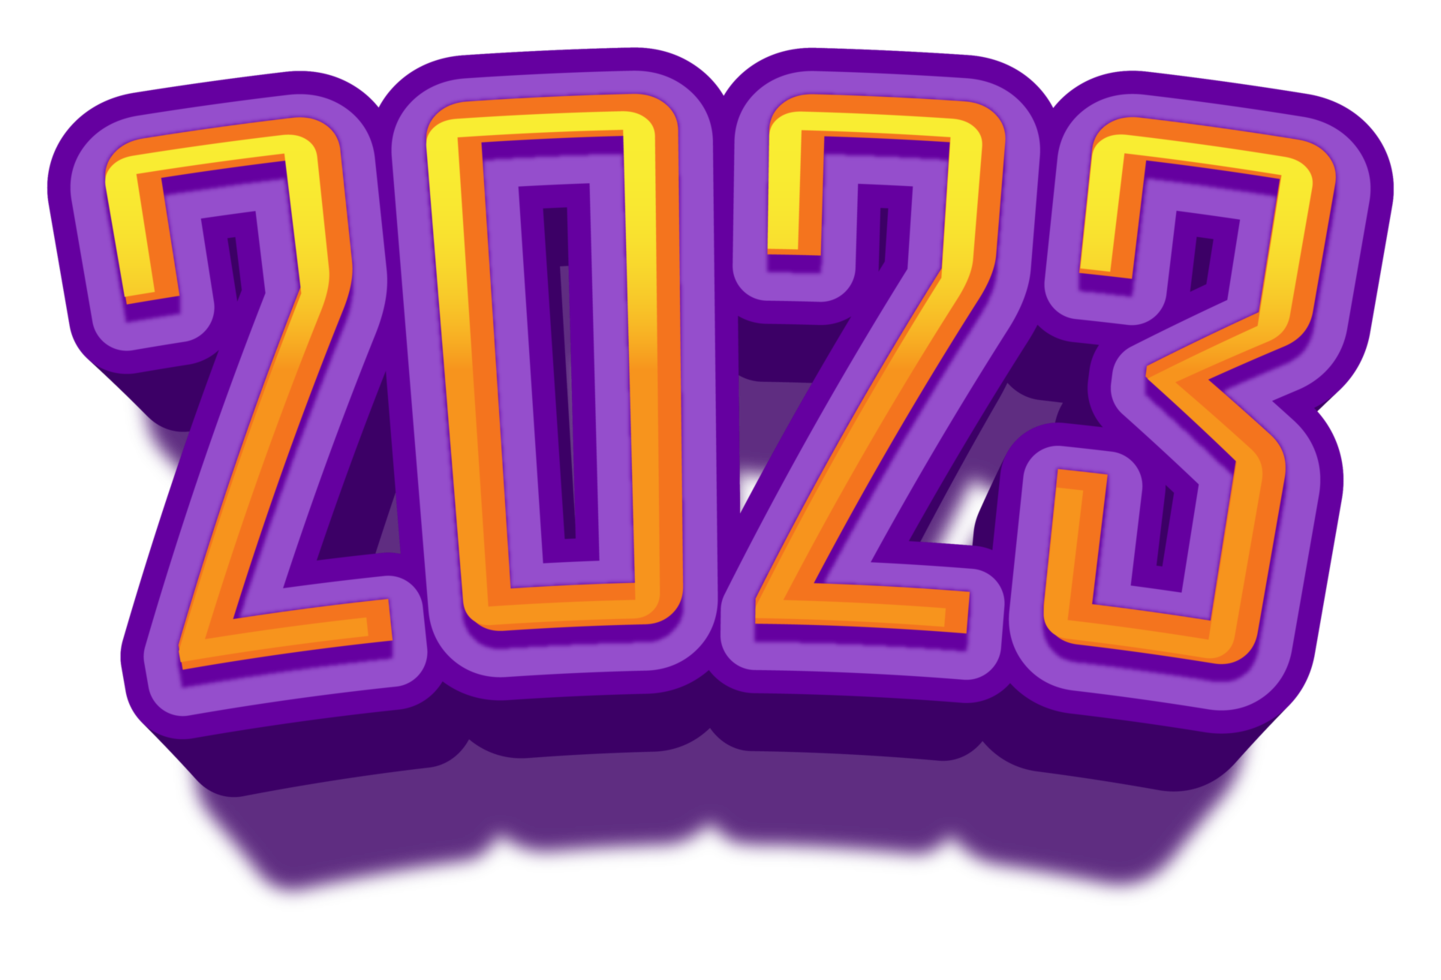 2023 happy new year eve gold purple text glitter shiny png